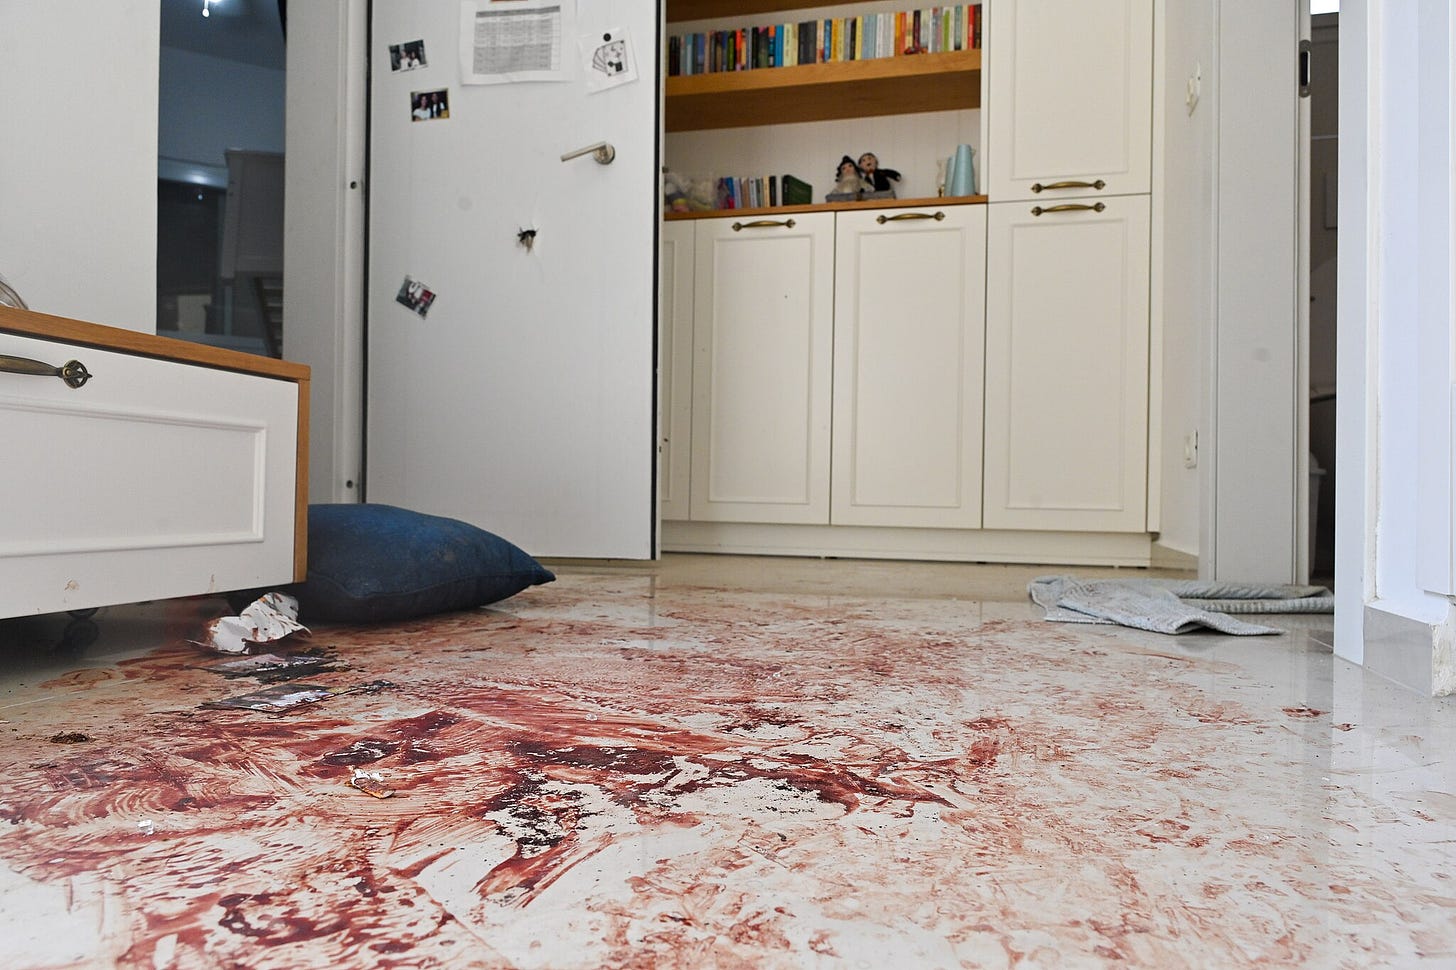 A family house in Nahal Oz kibbutz after Hamas terror-attack on October 7, 2023